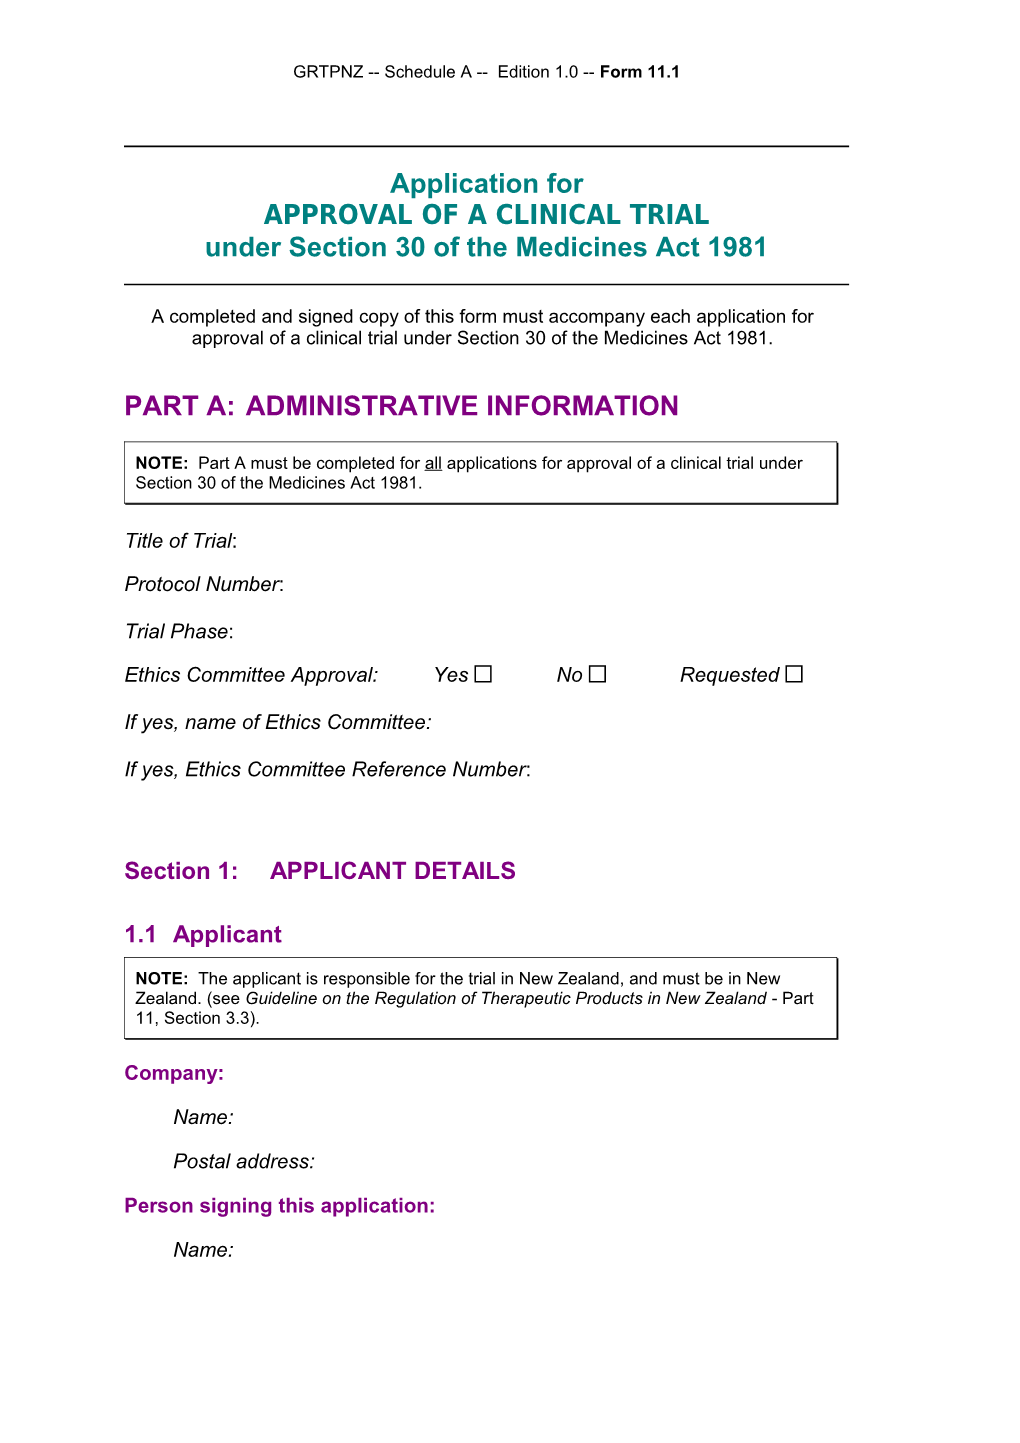 Under Section 30 of the Medicines Act 1981